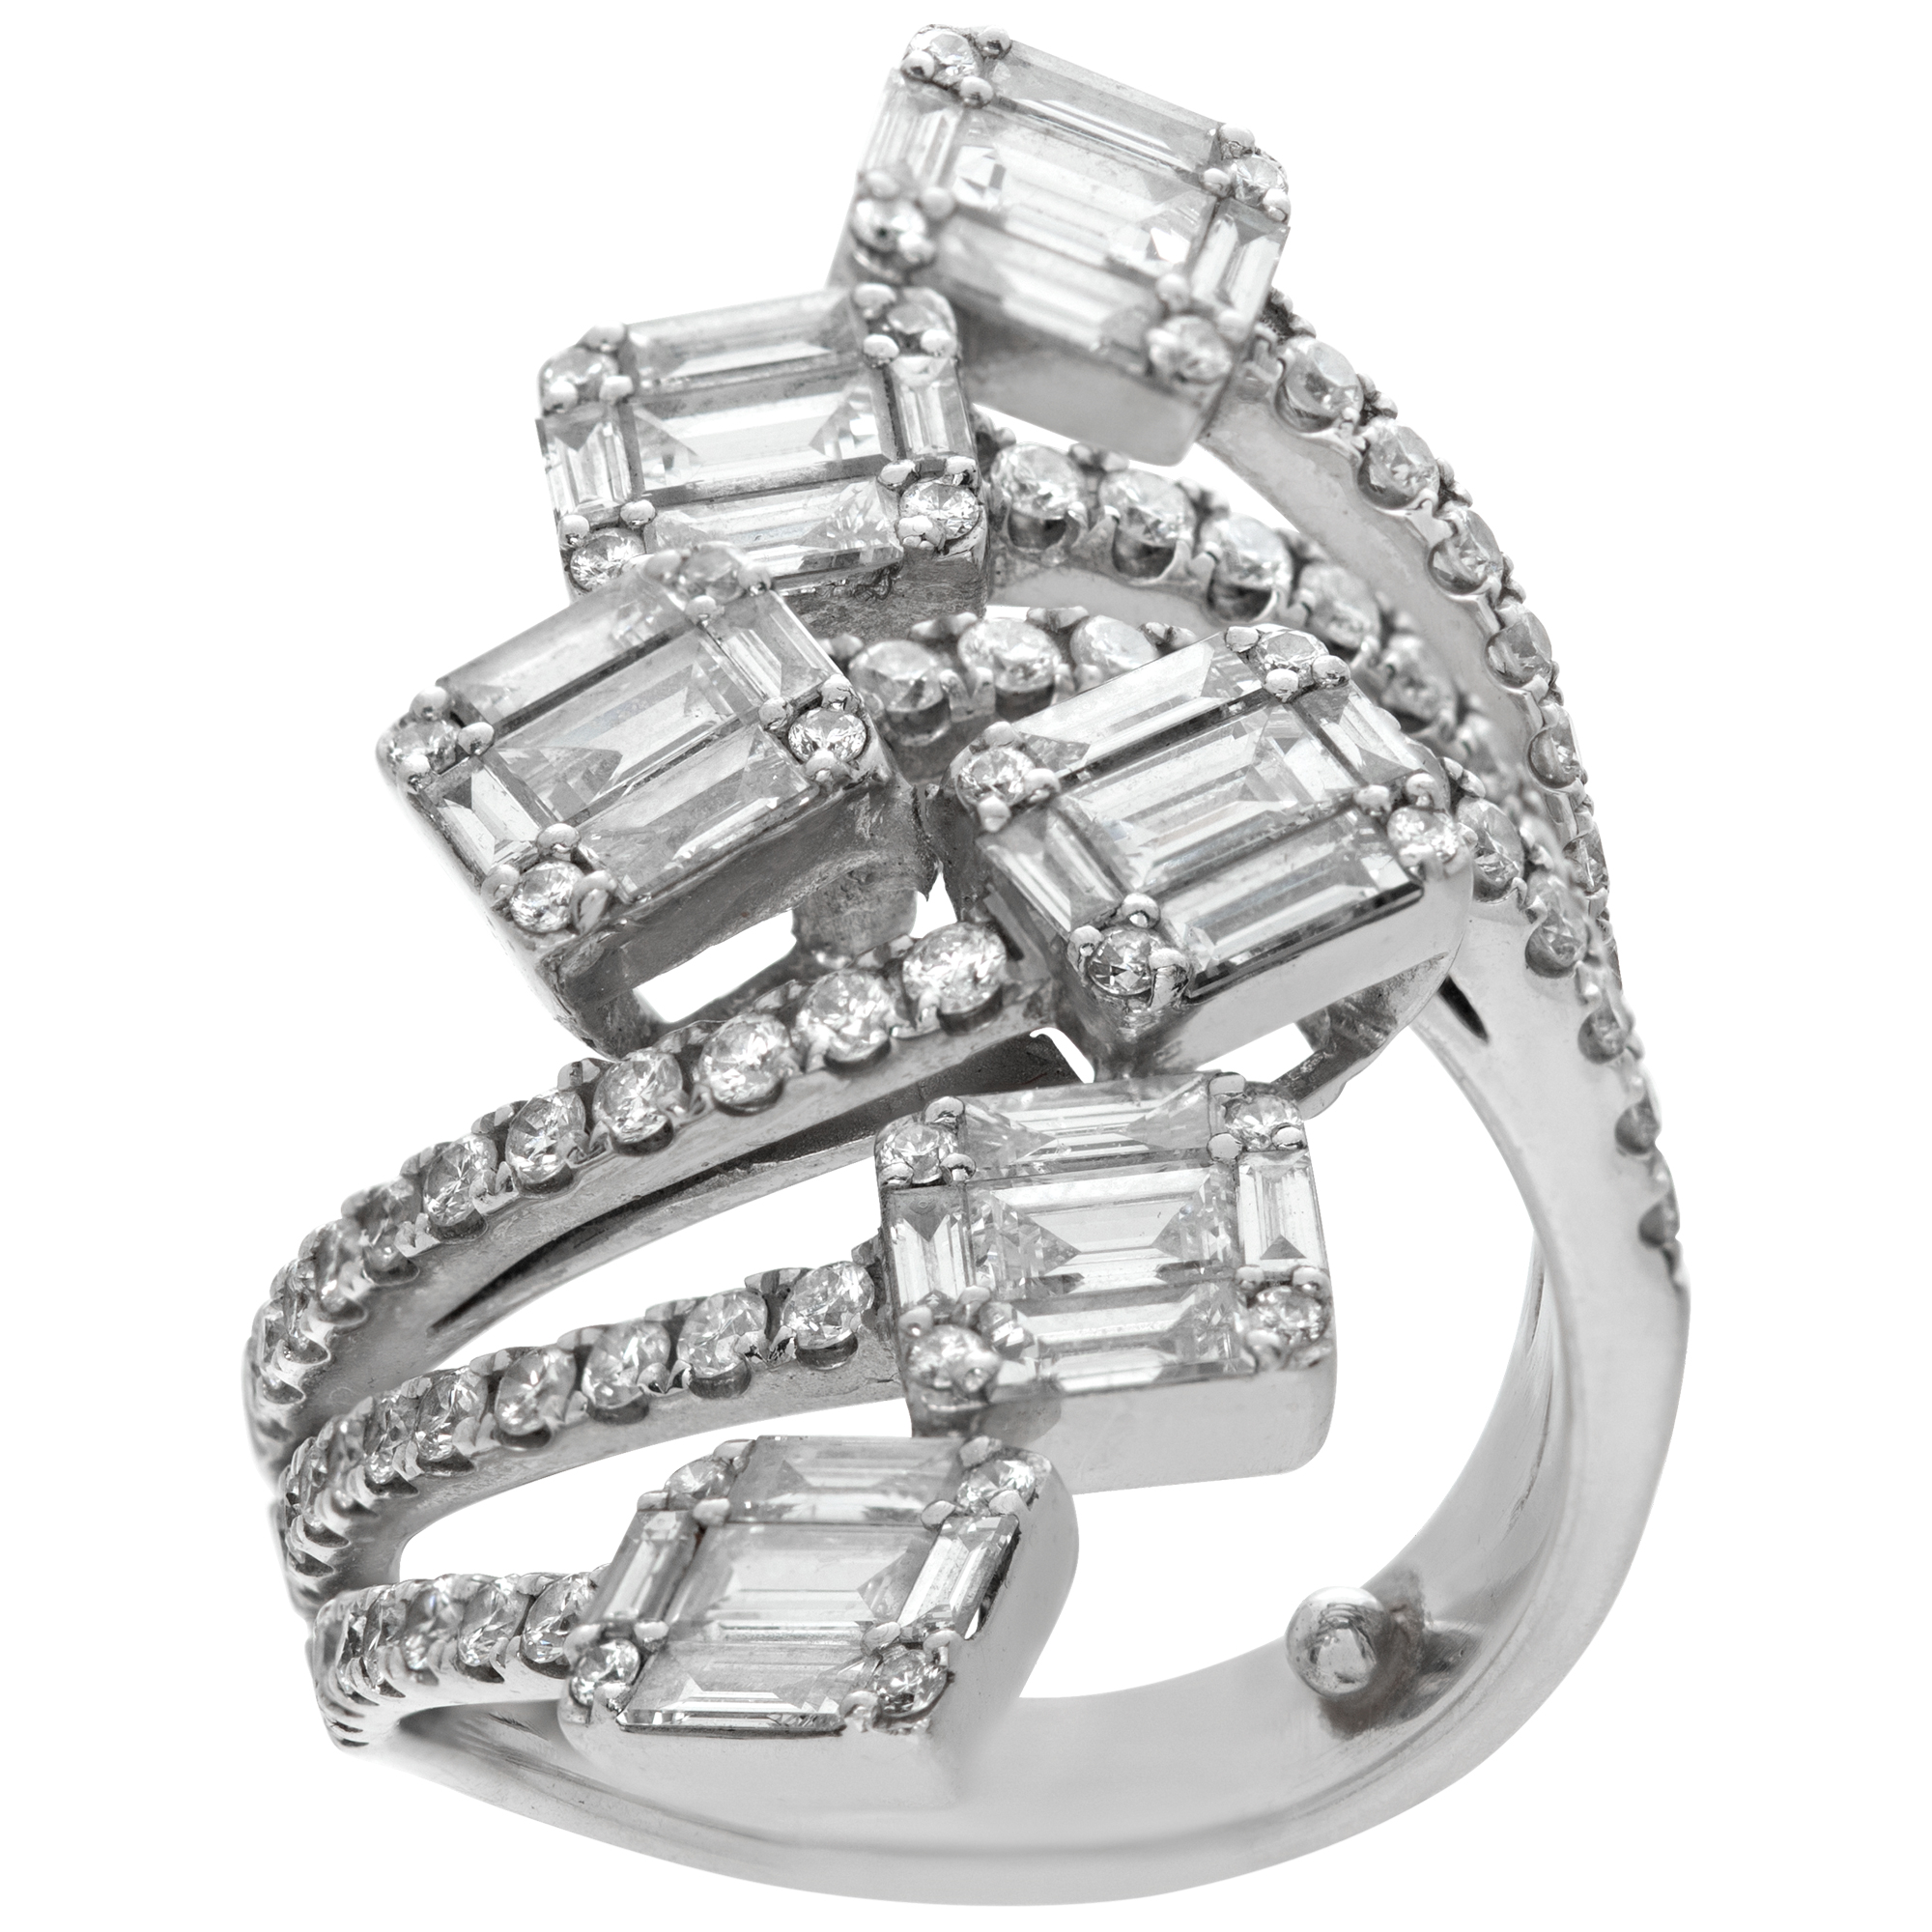 "Illusion" baguettes and round brilliant cut diamonds ring in 18k white gold. Total approx diamond weight: 2.00 carats